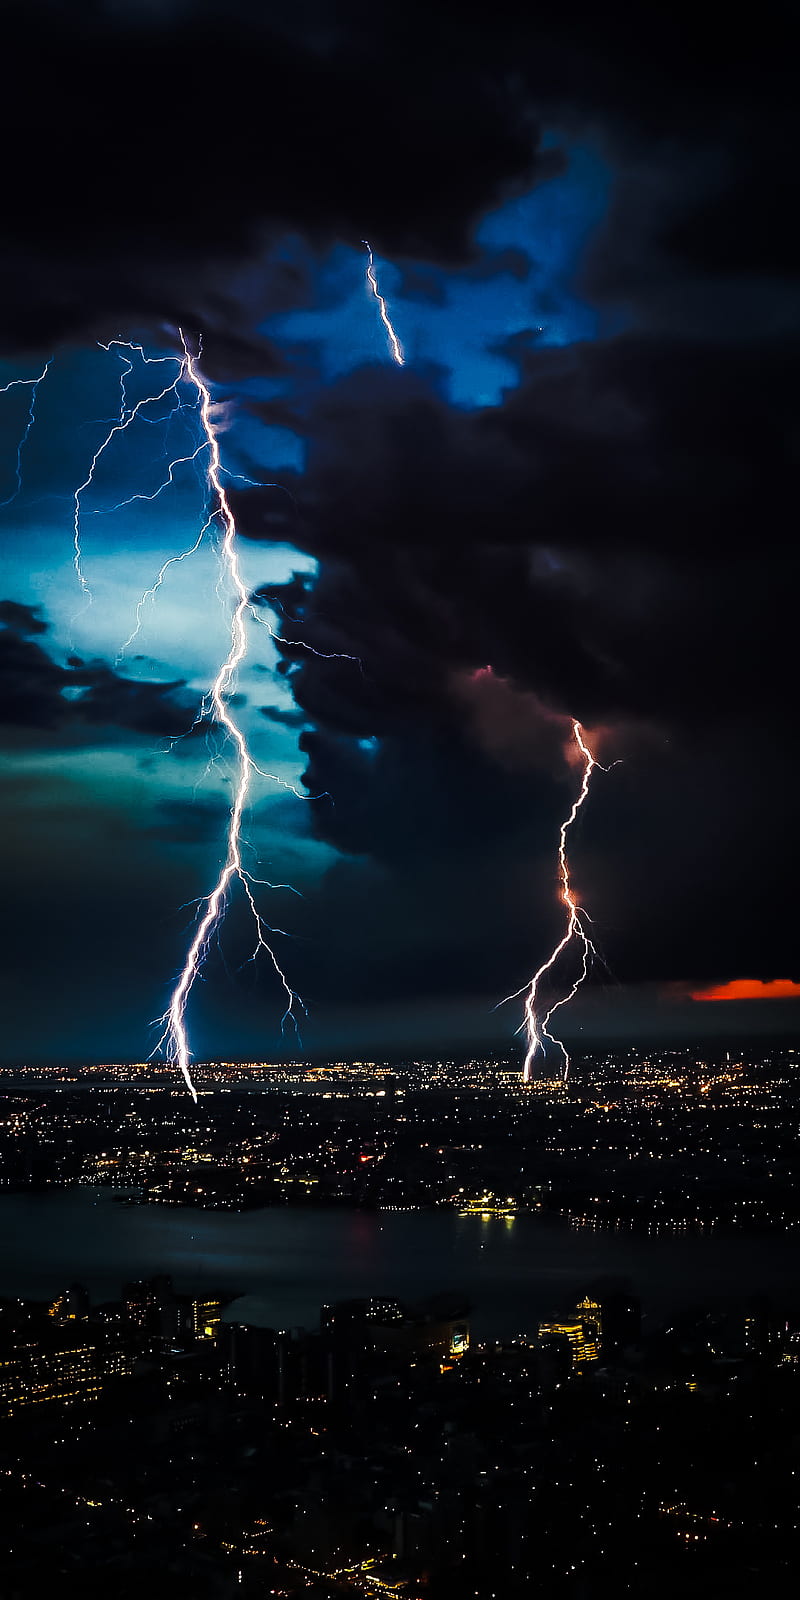 Thunderstorm Wallpaper Clouds  Free stock photo on Pixabay  Pixabay